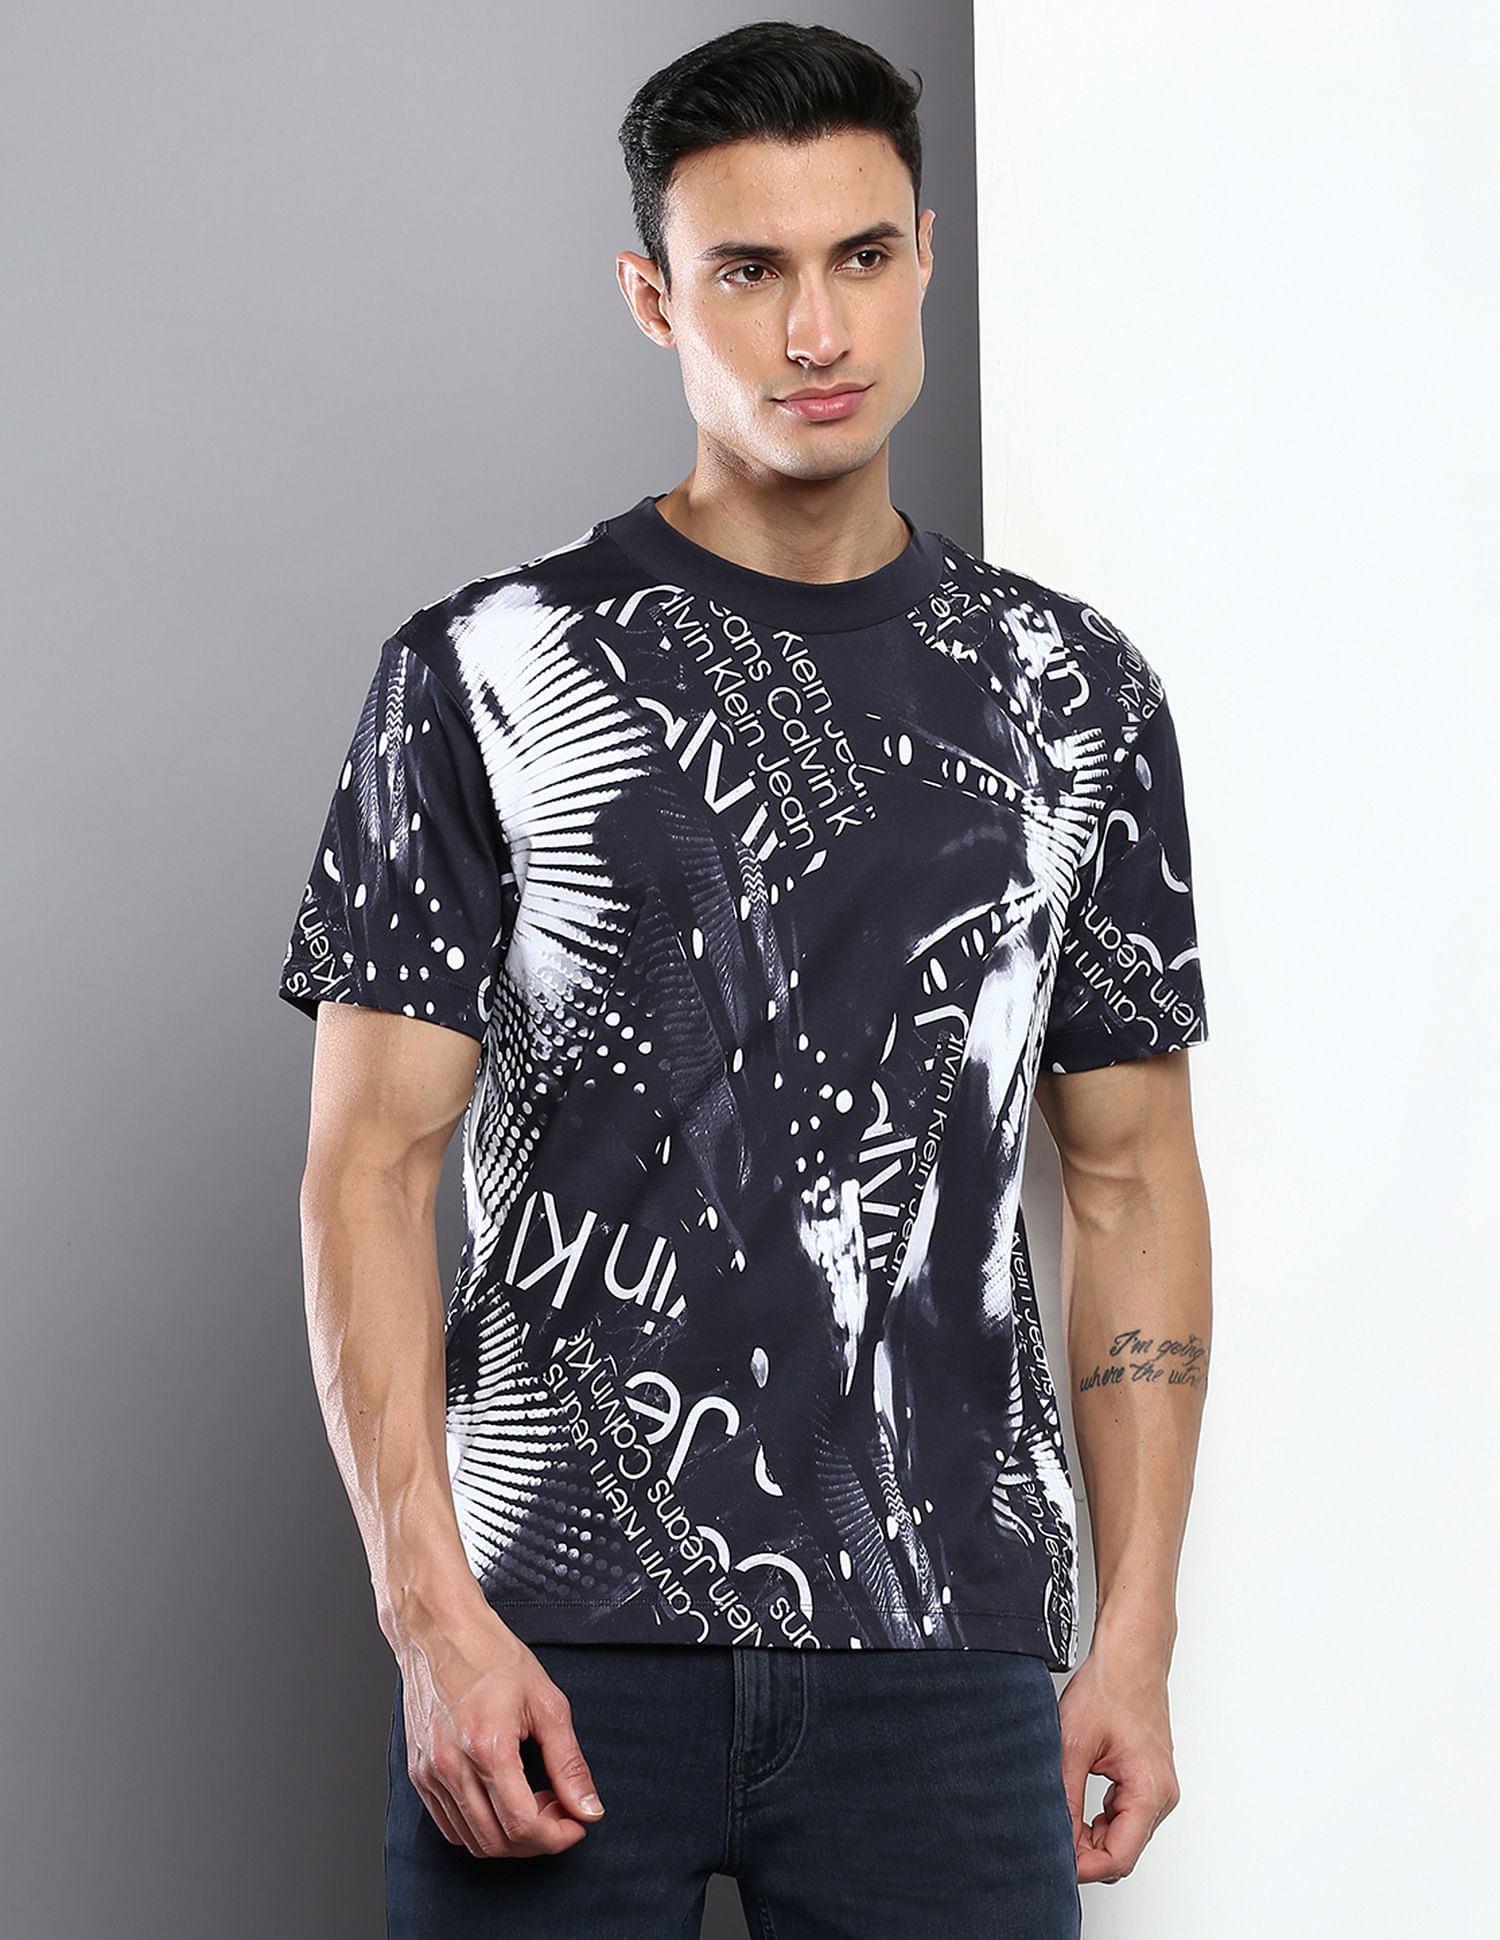 Jeans T-Shirt All-Over Print Calvin Klein Disrupted Logo Buy